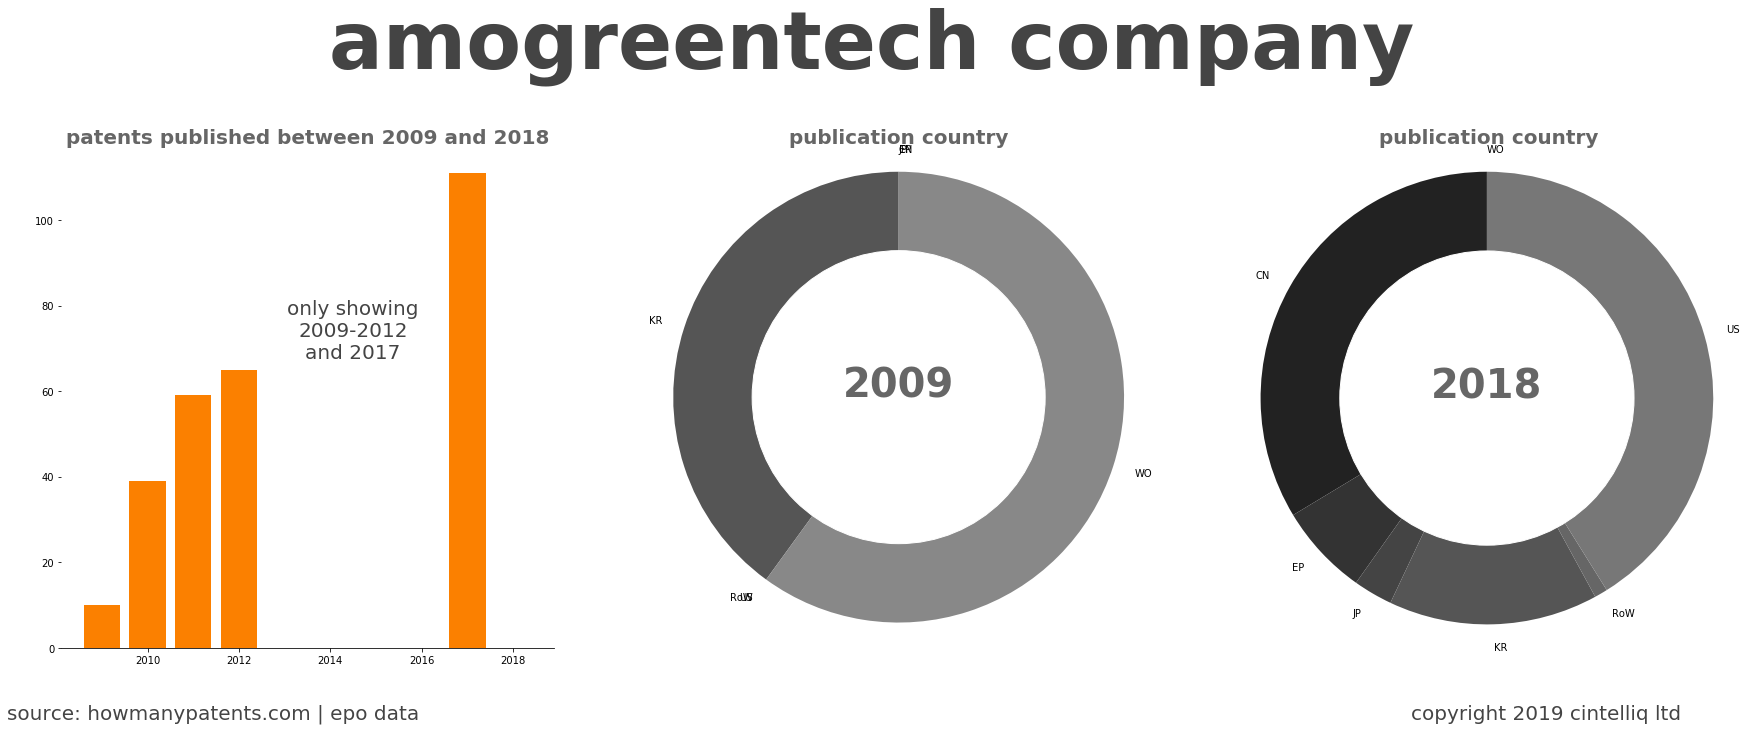 summary of patents for Amogreentech Company